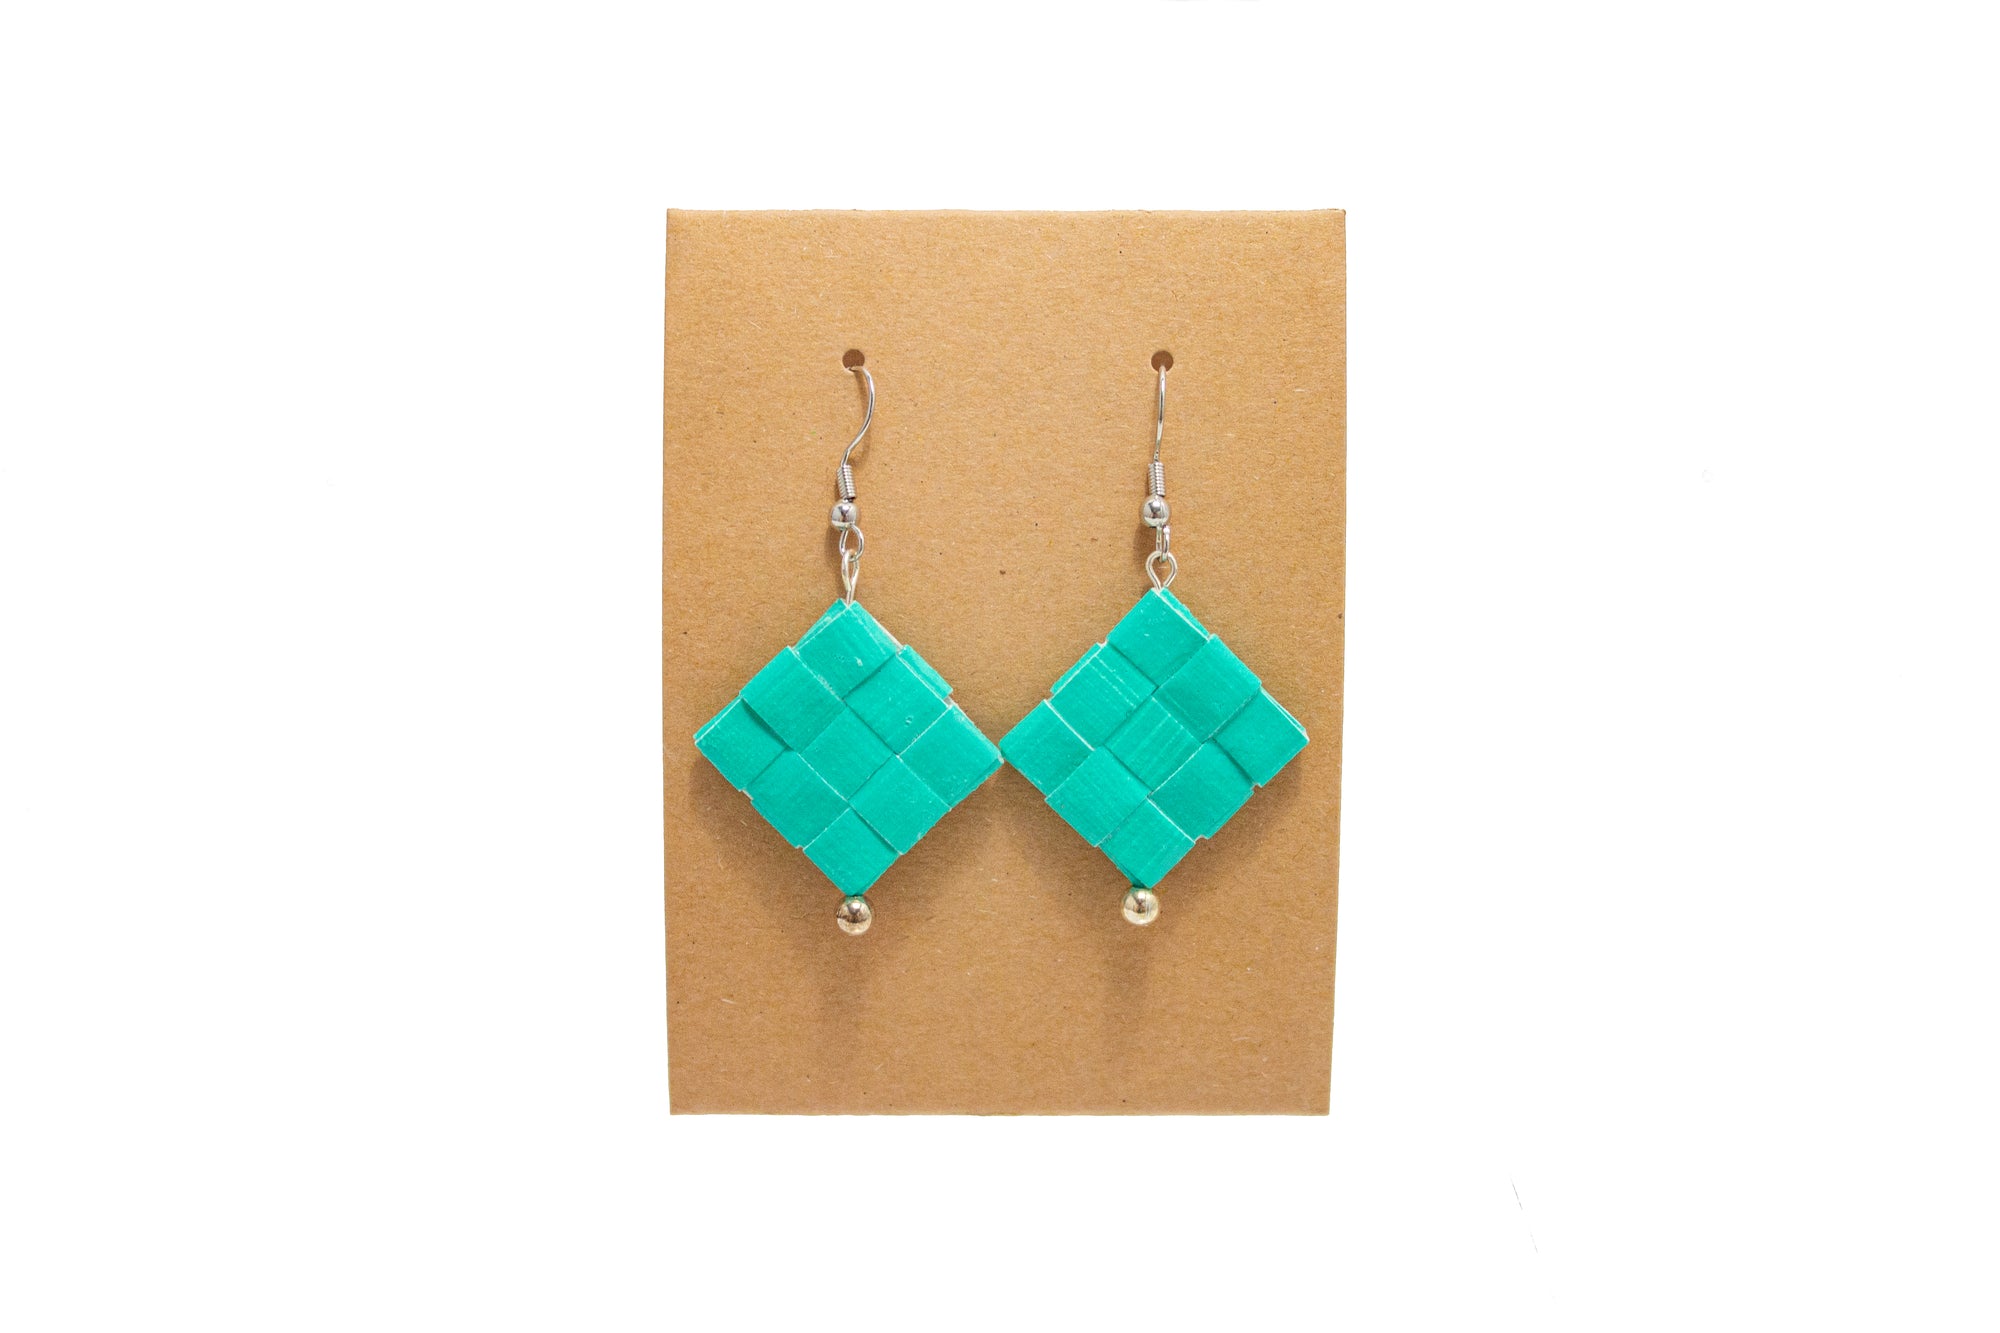 Small Canvas Earrings - Teal/Silver